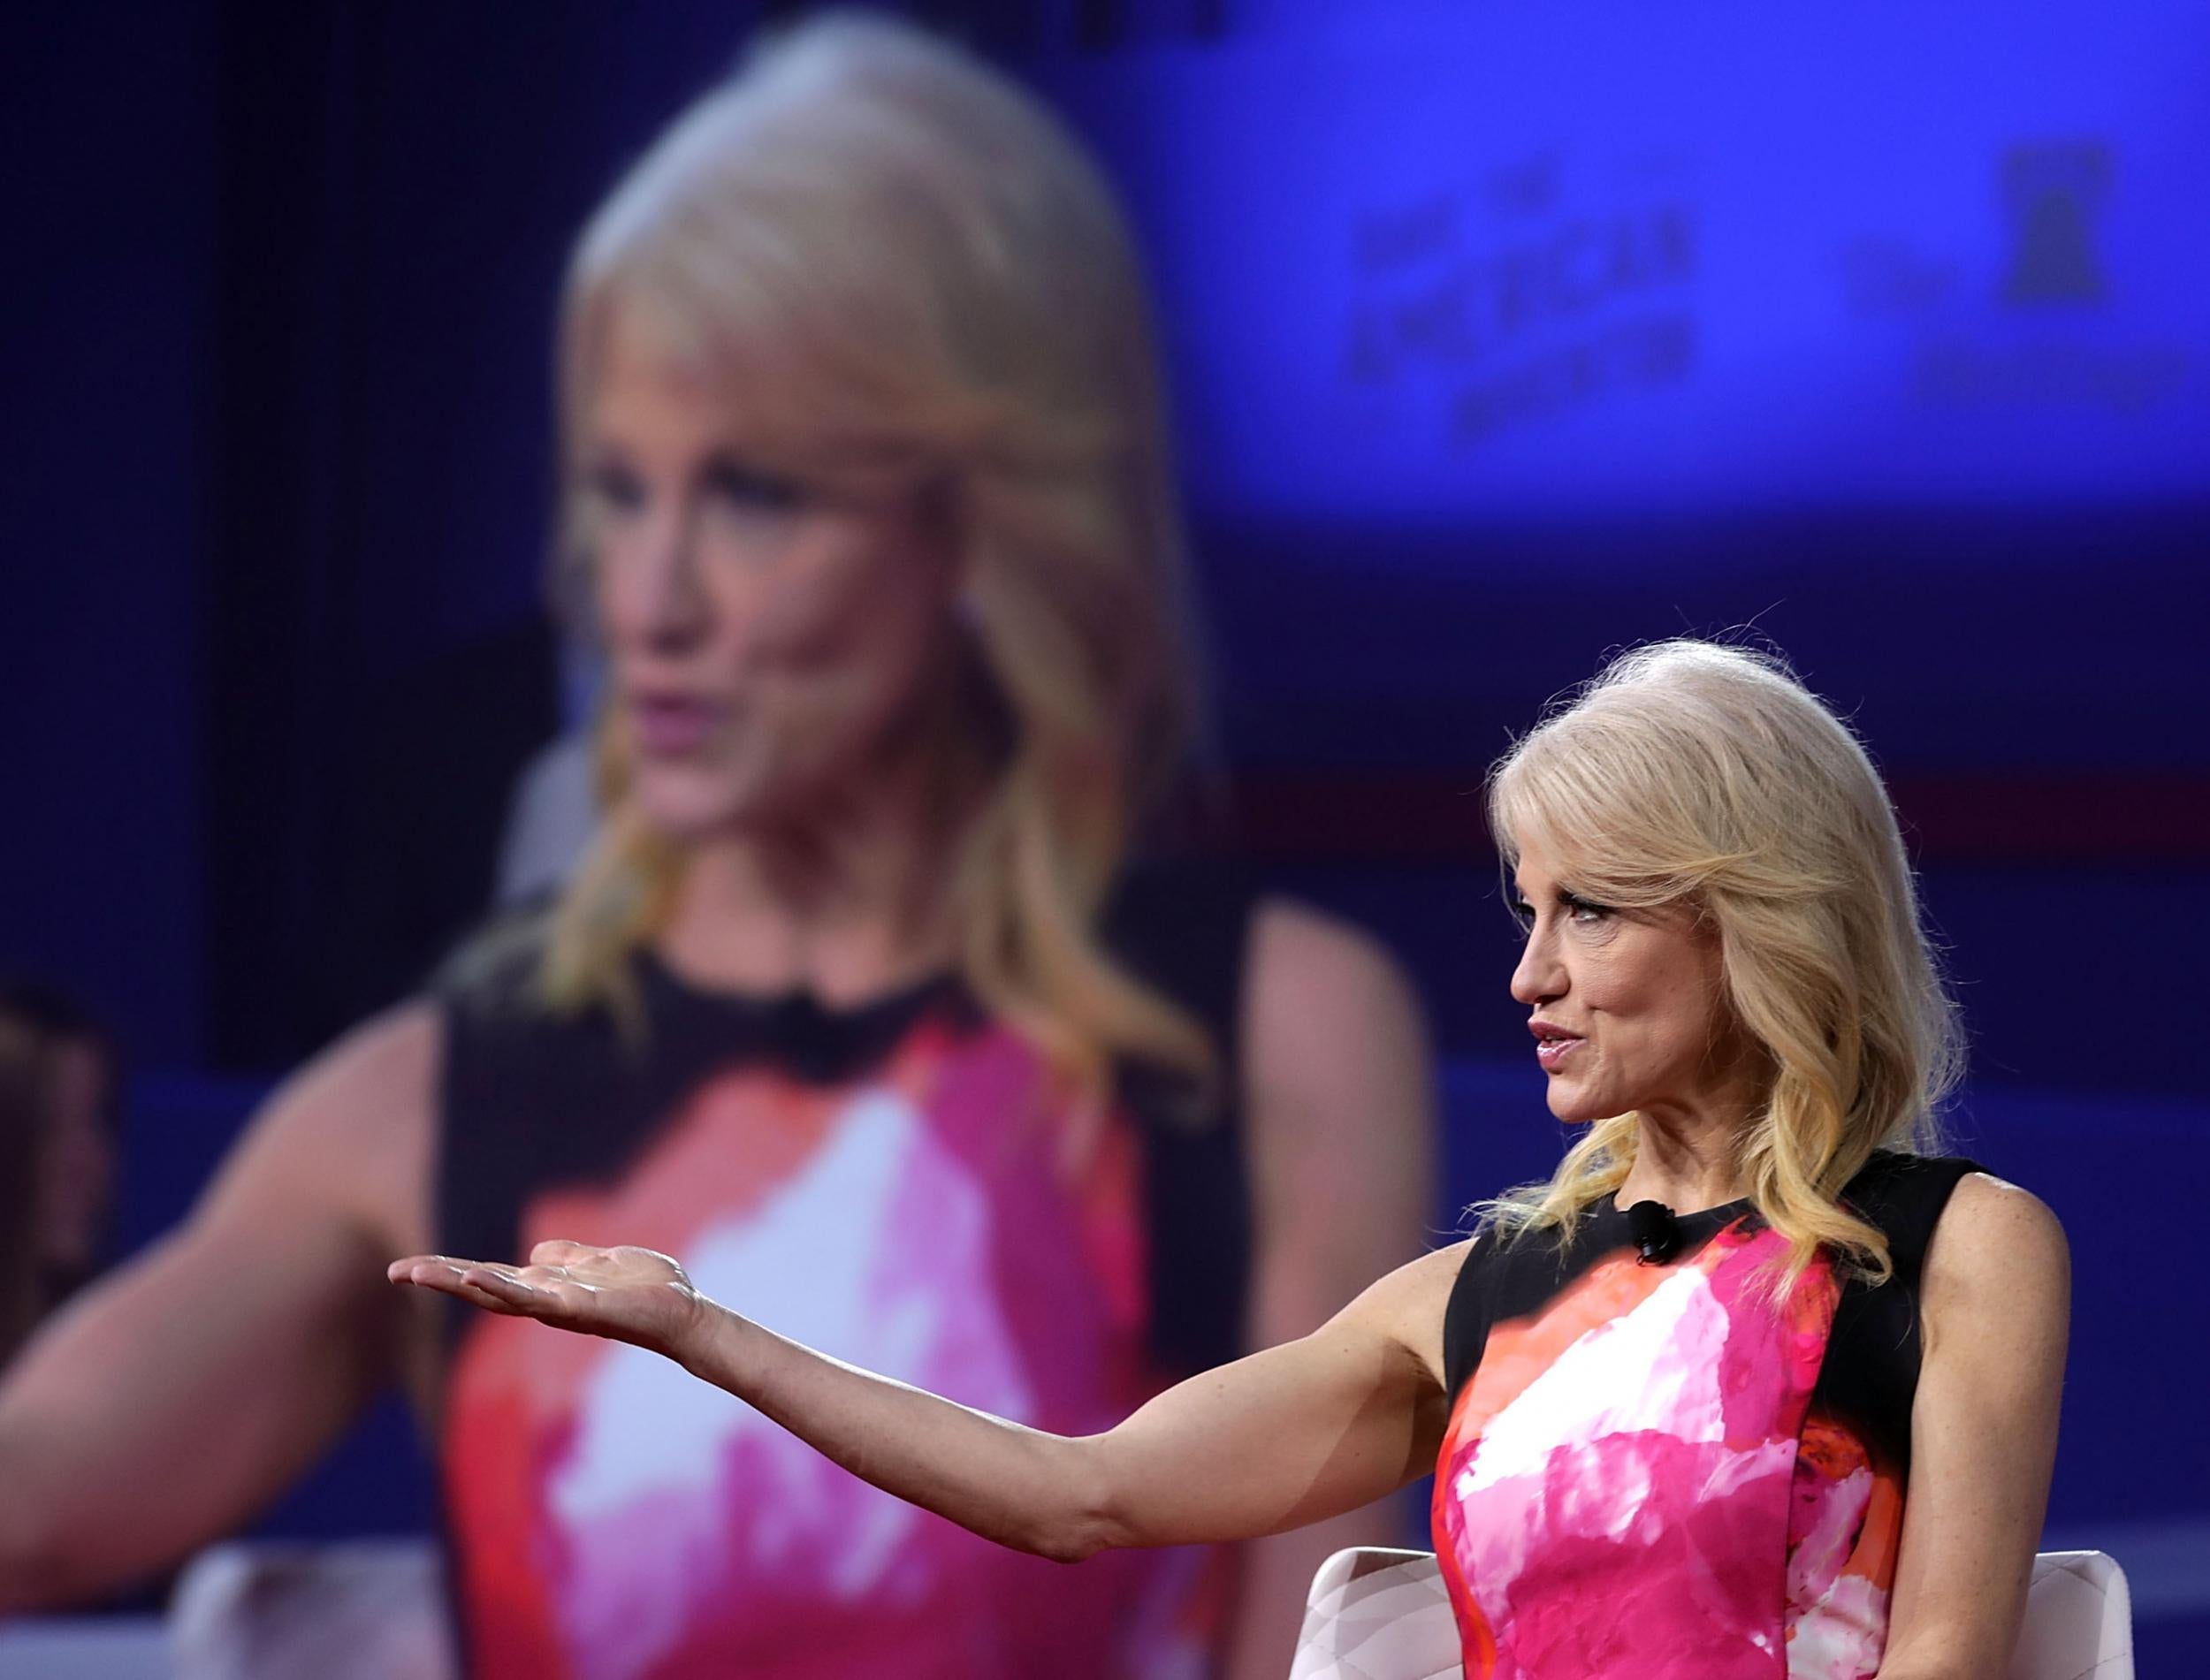 White House Counsellor to the President Kellyanne Conway is interviewed by Fox News, soon before being reportedly banned from appearing on TV